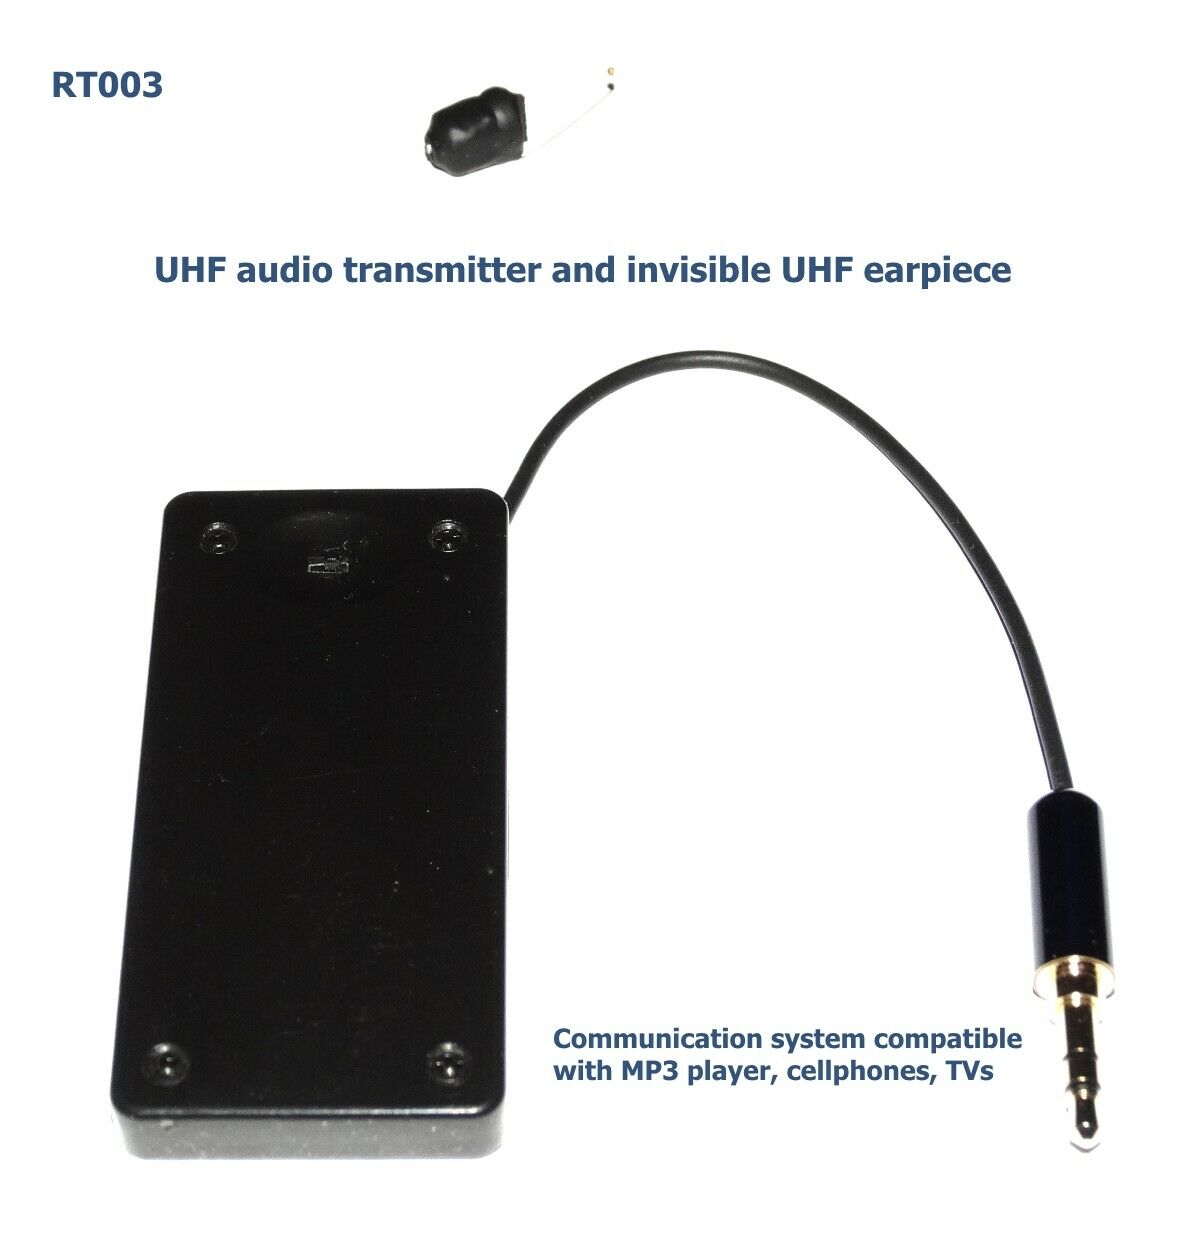 vcxn Bluetooth Tansmitter Connect to Cellphone,Inductive Transmit Audio Sound to Invisible Wireless Earpiece for Covert Communication and Music Listening 